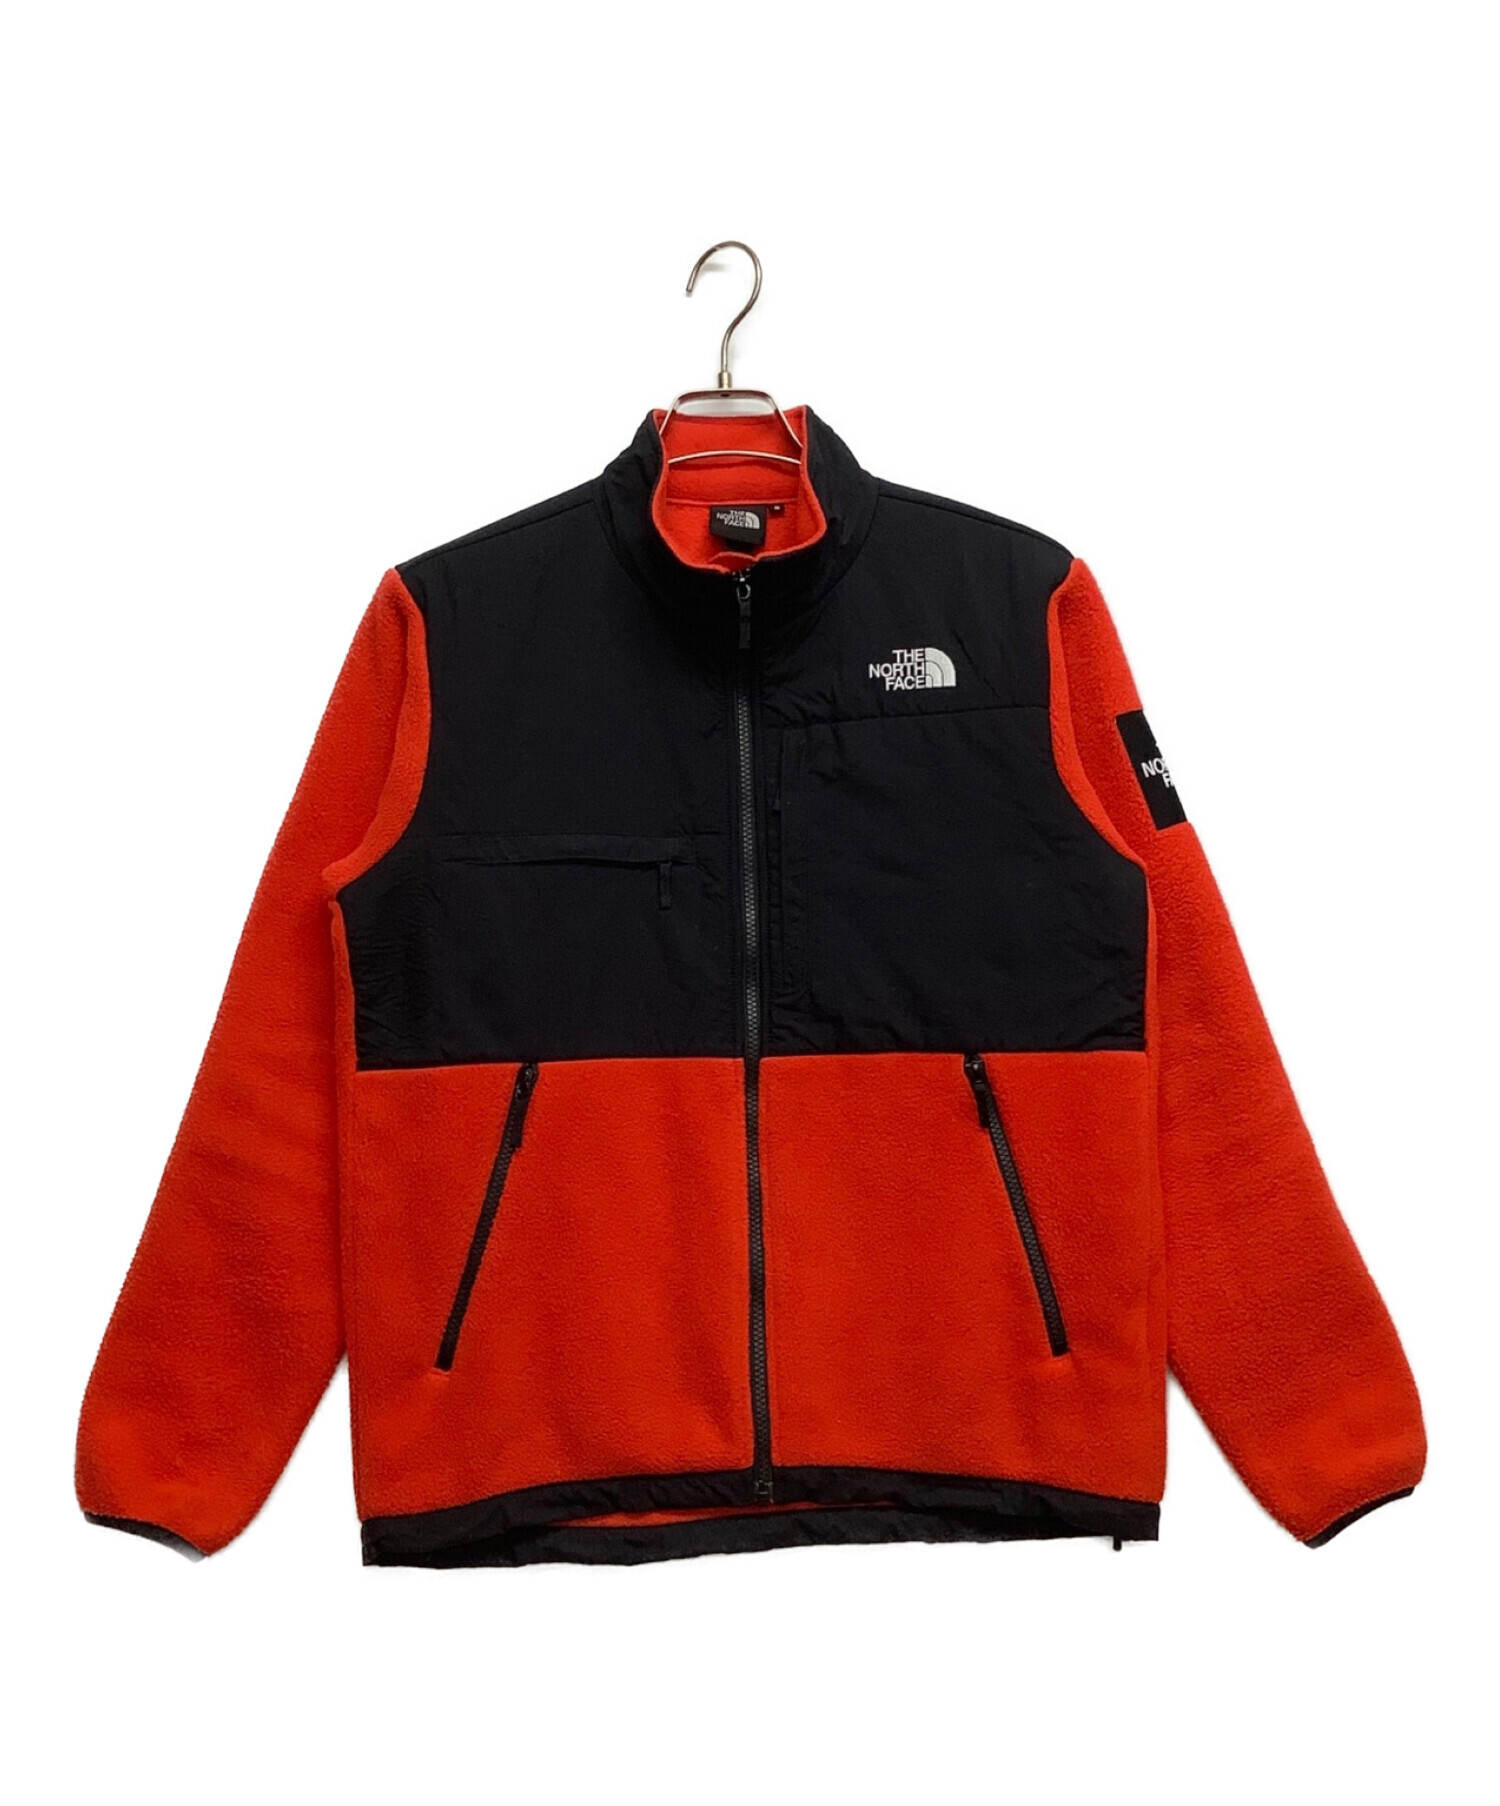 THE NORTH FACE デナリジャケット NA71831 レッド